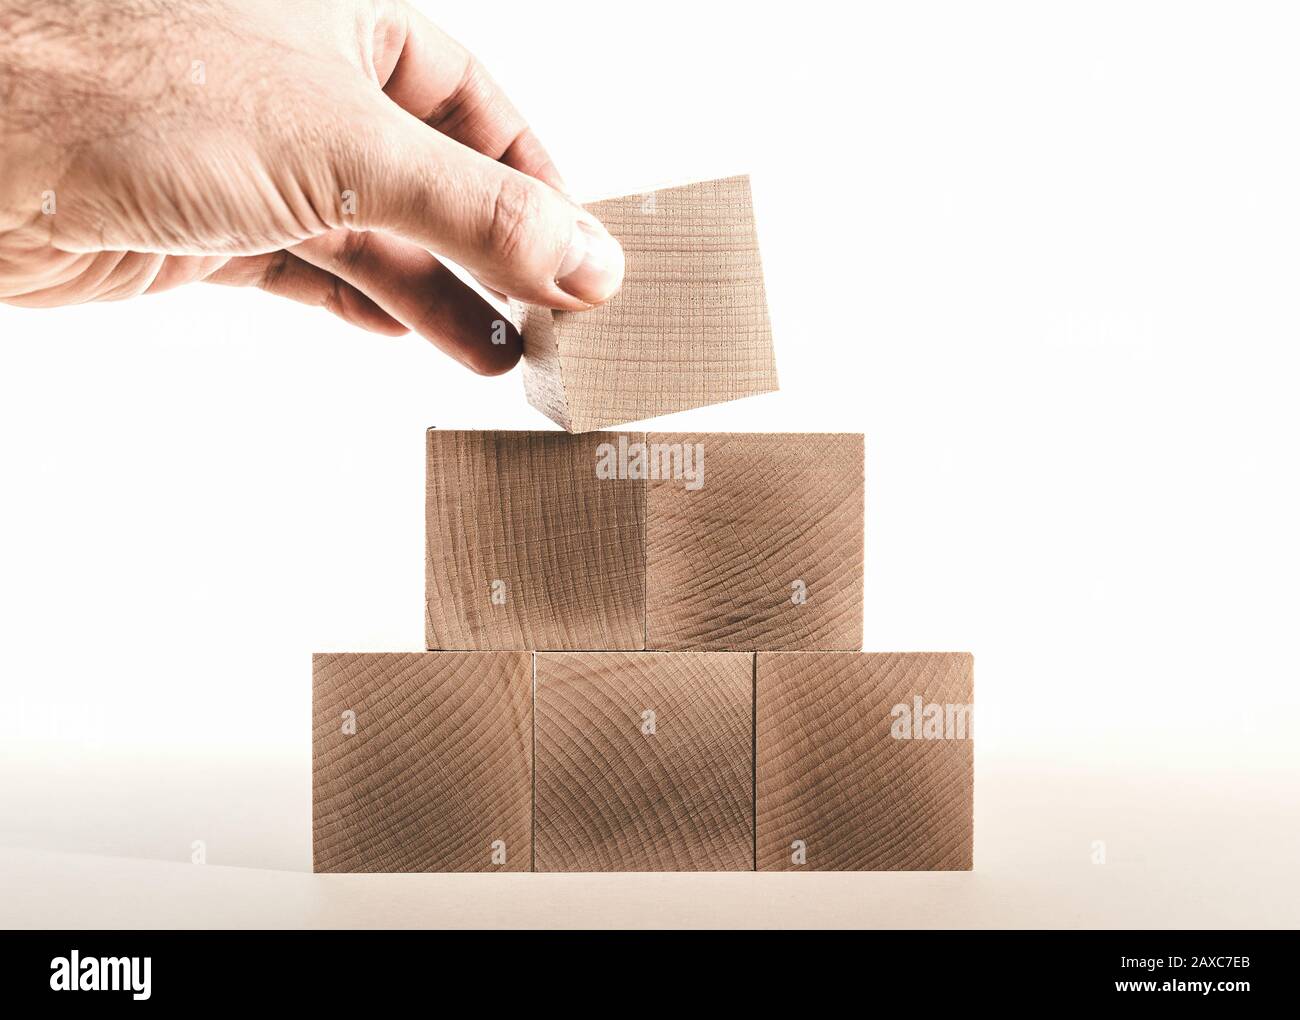 hand placing last wood block on top of pyramid, business growth concept Stock Photo